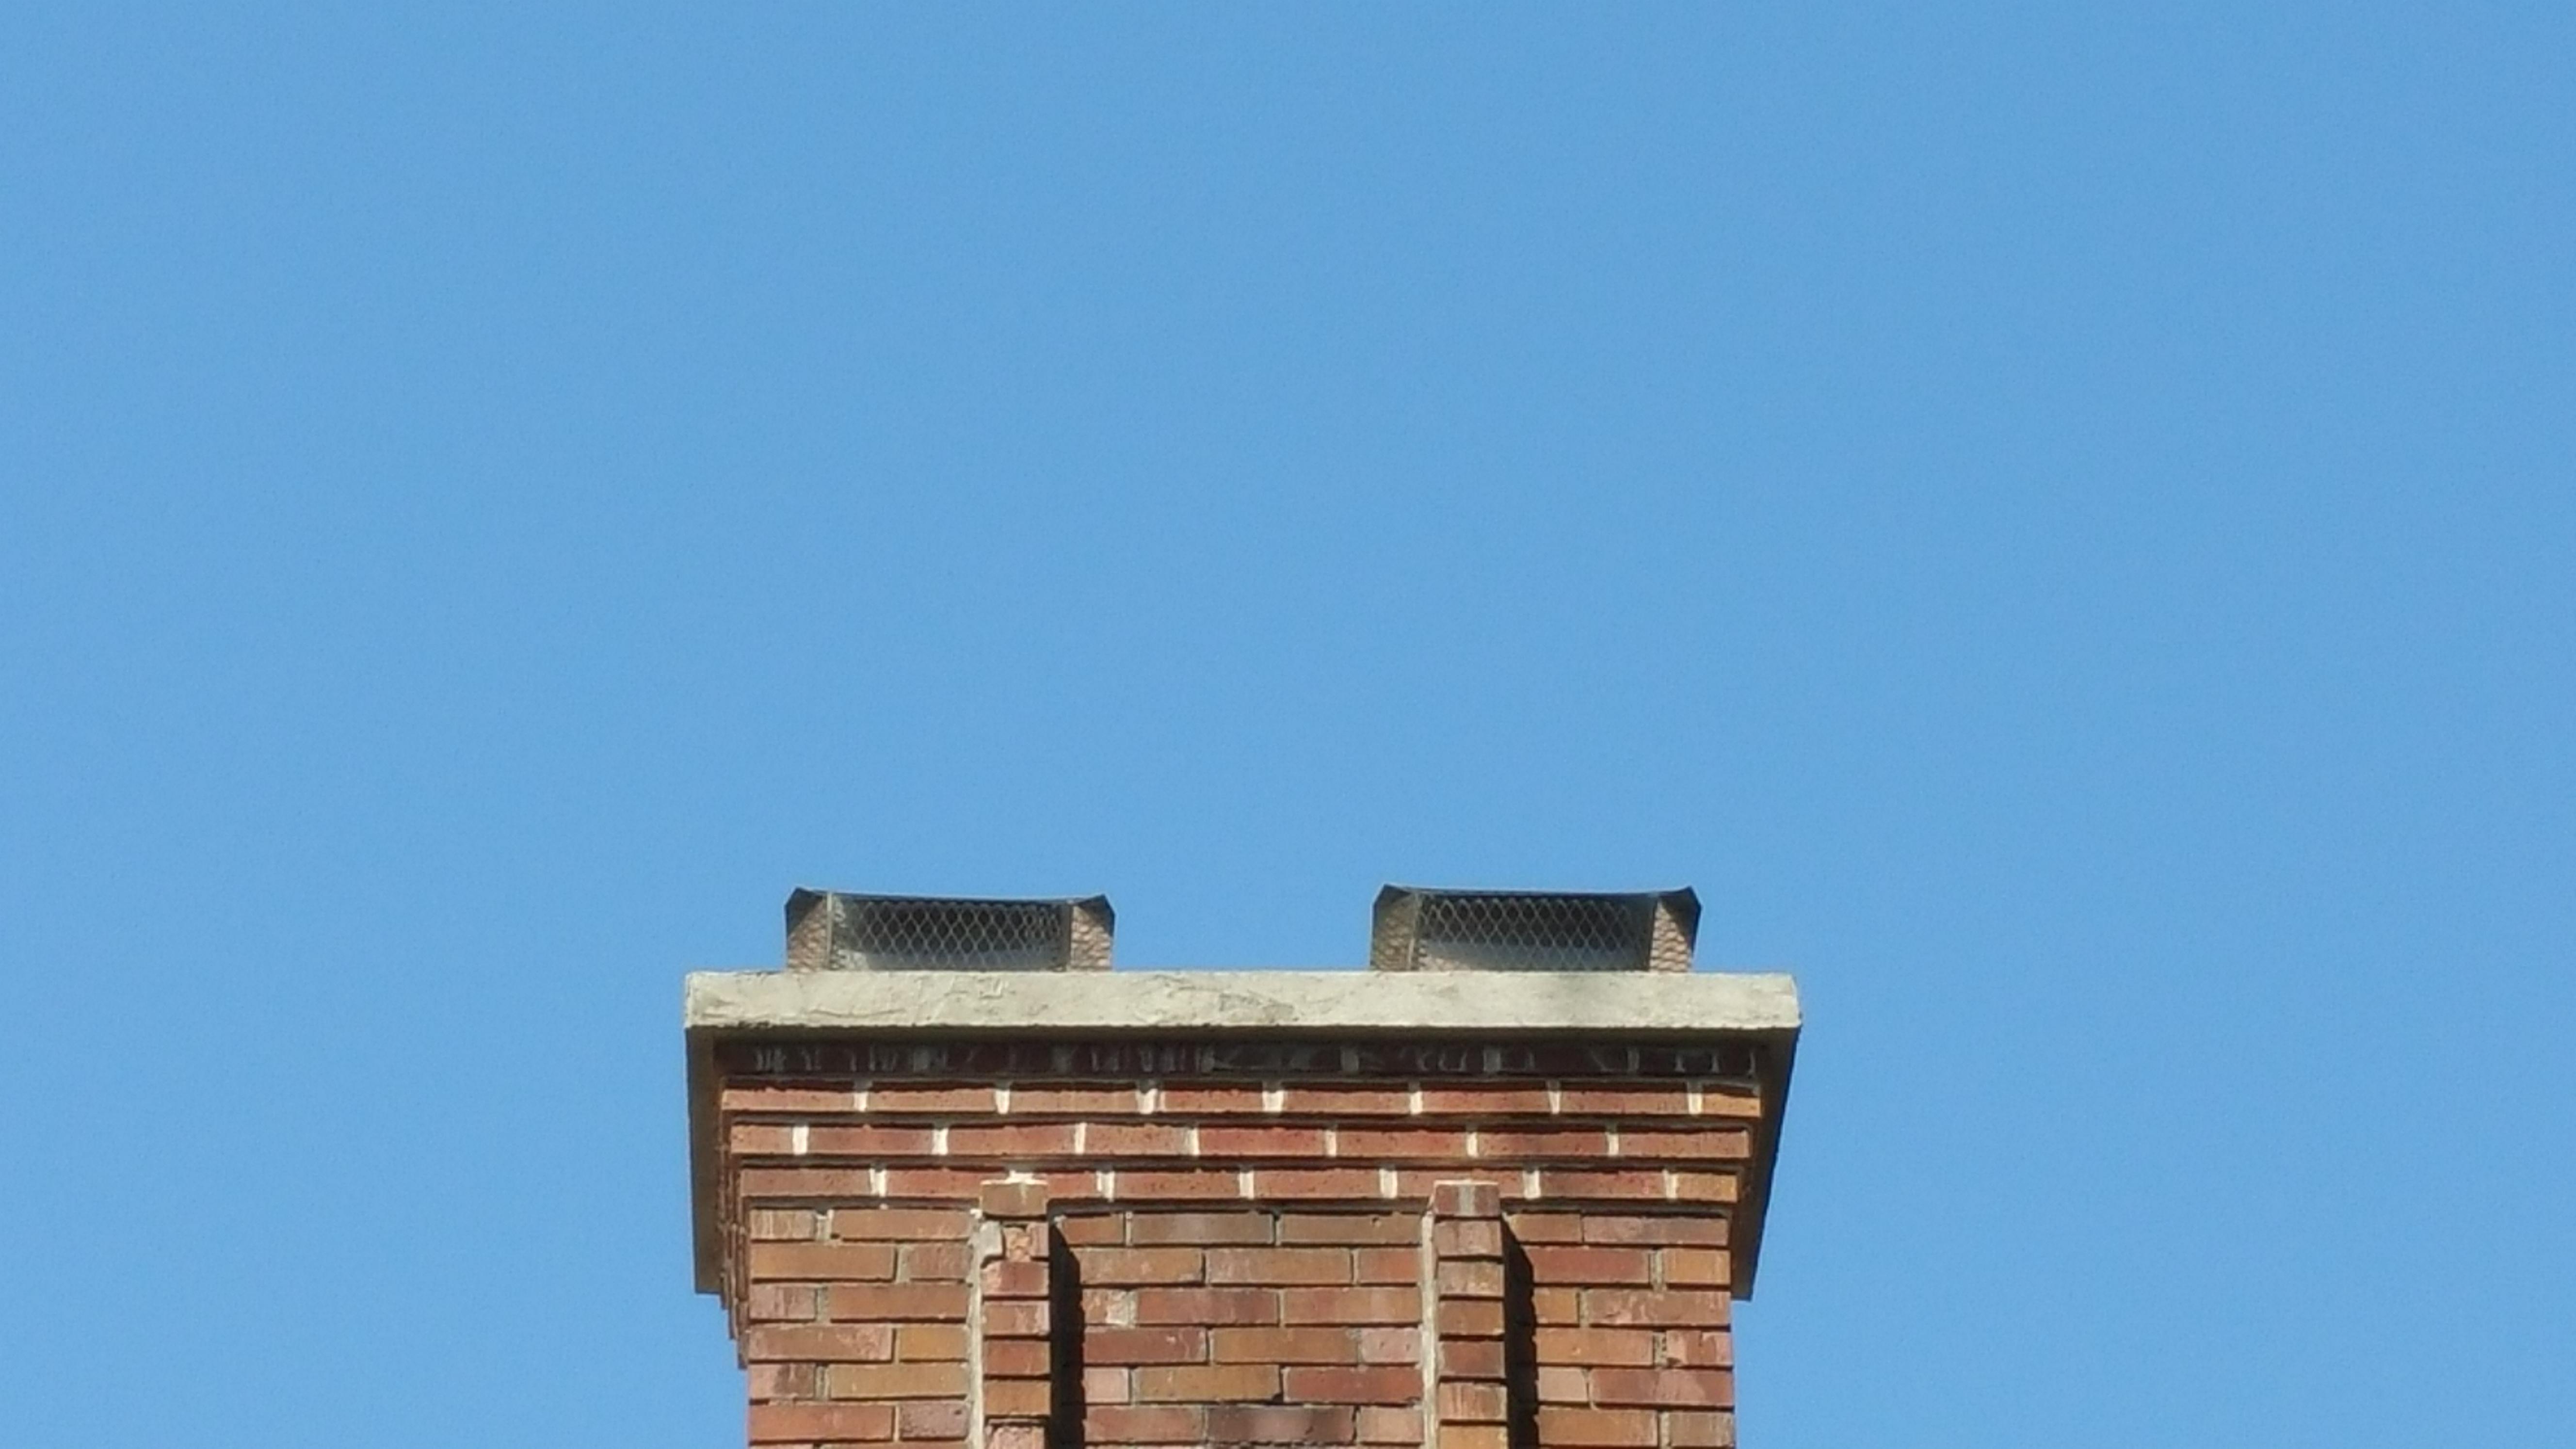 We removed top 6 courses and replaced 4 and added a crown with 2 stainless steel chimney caps